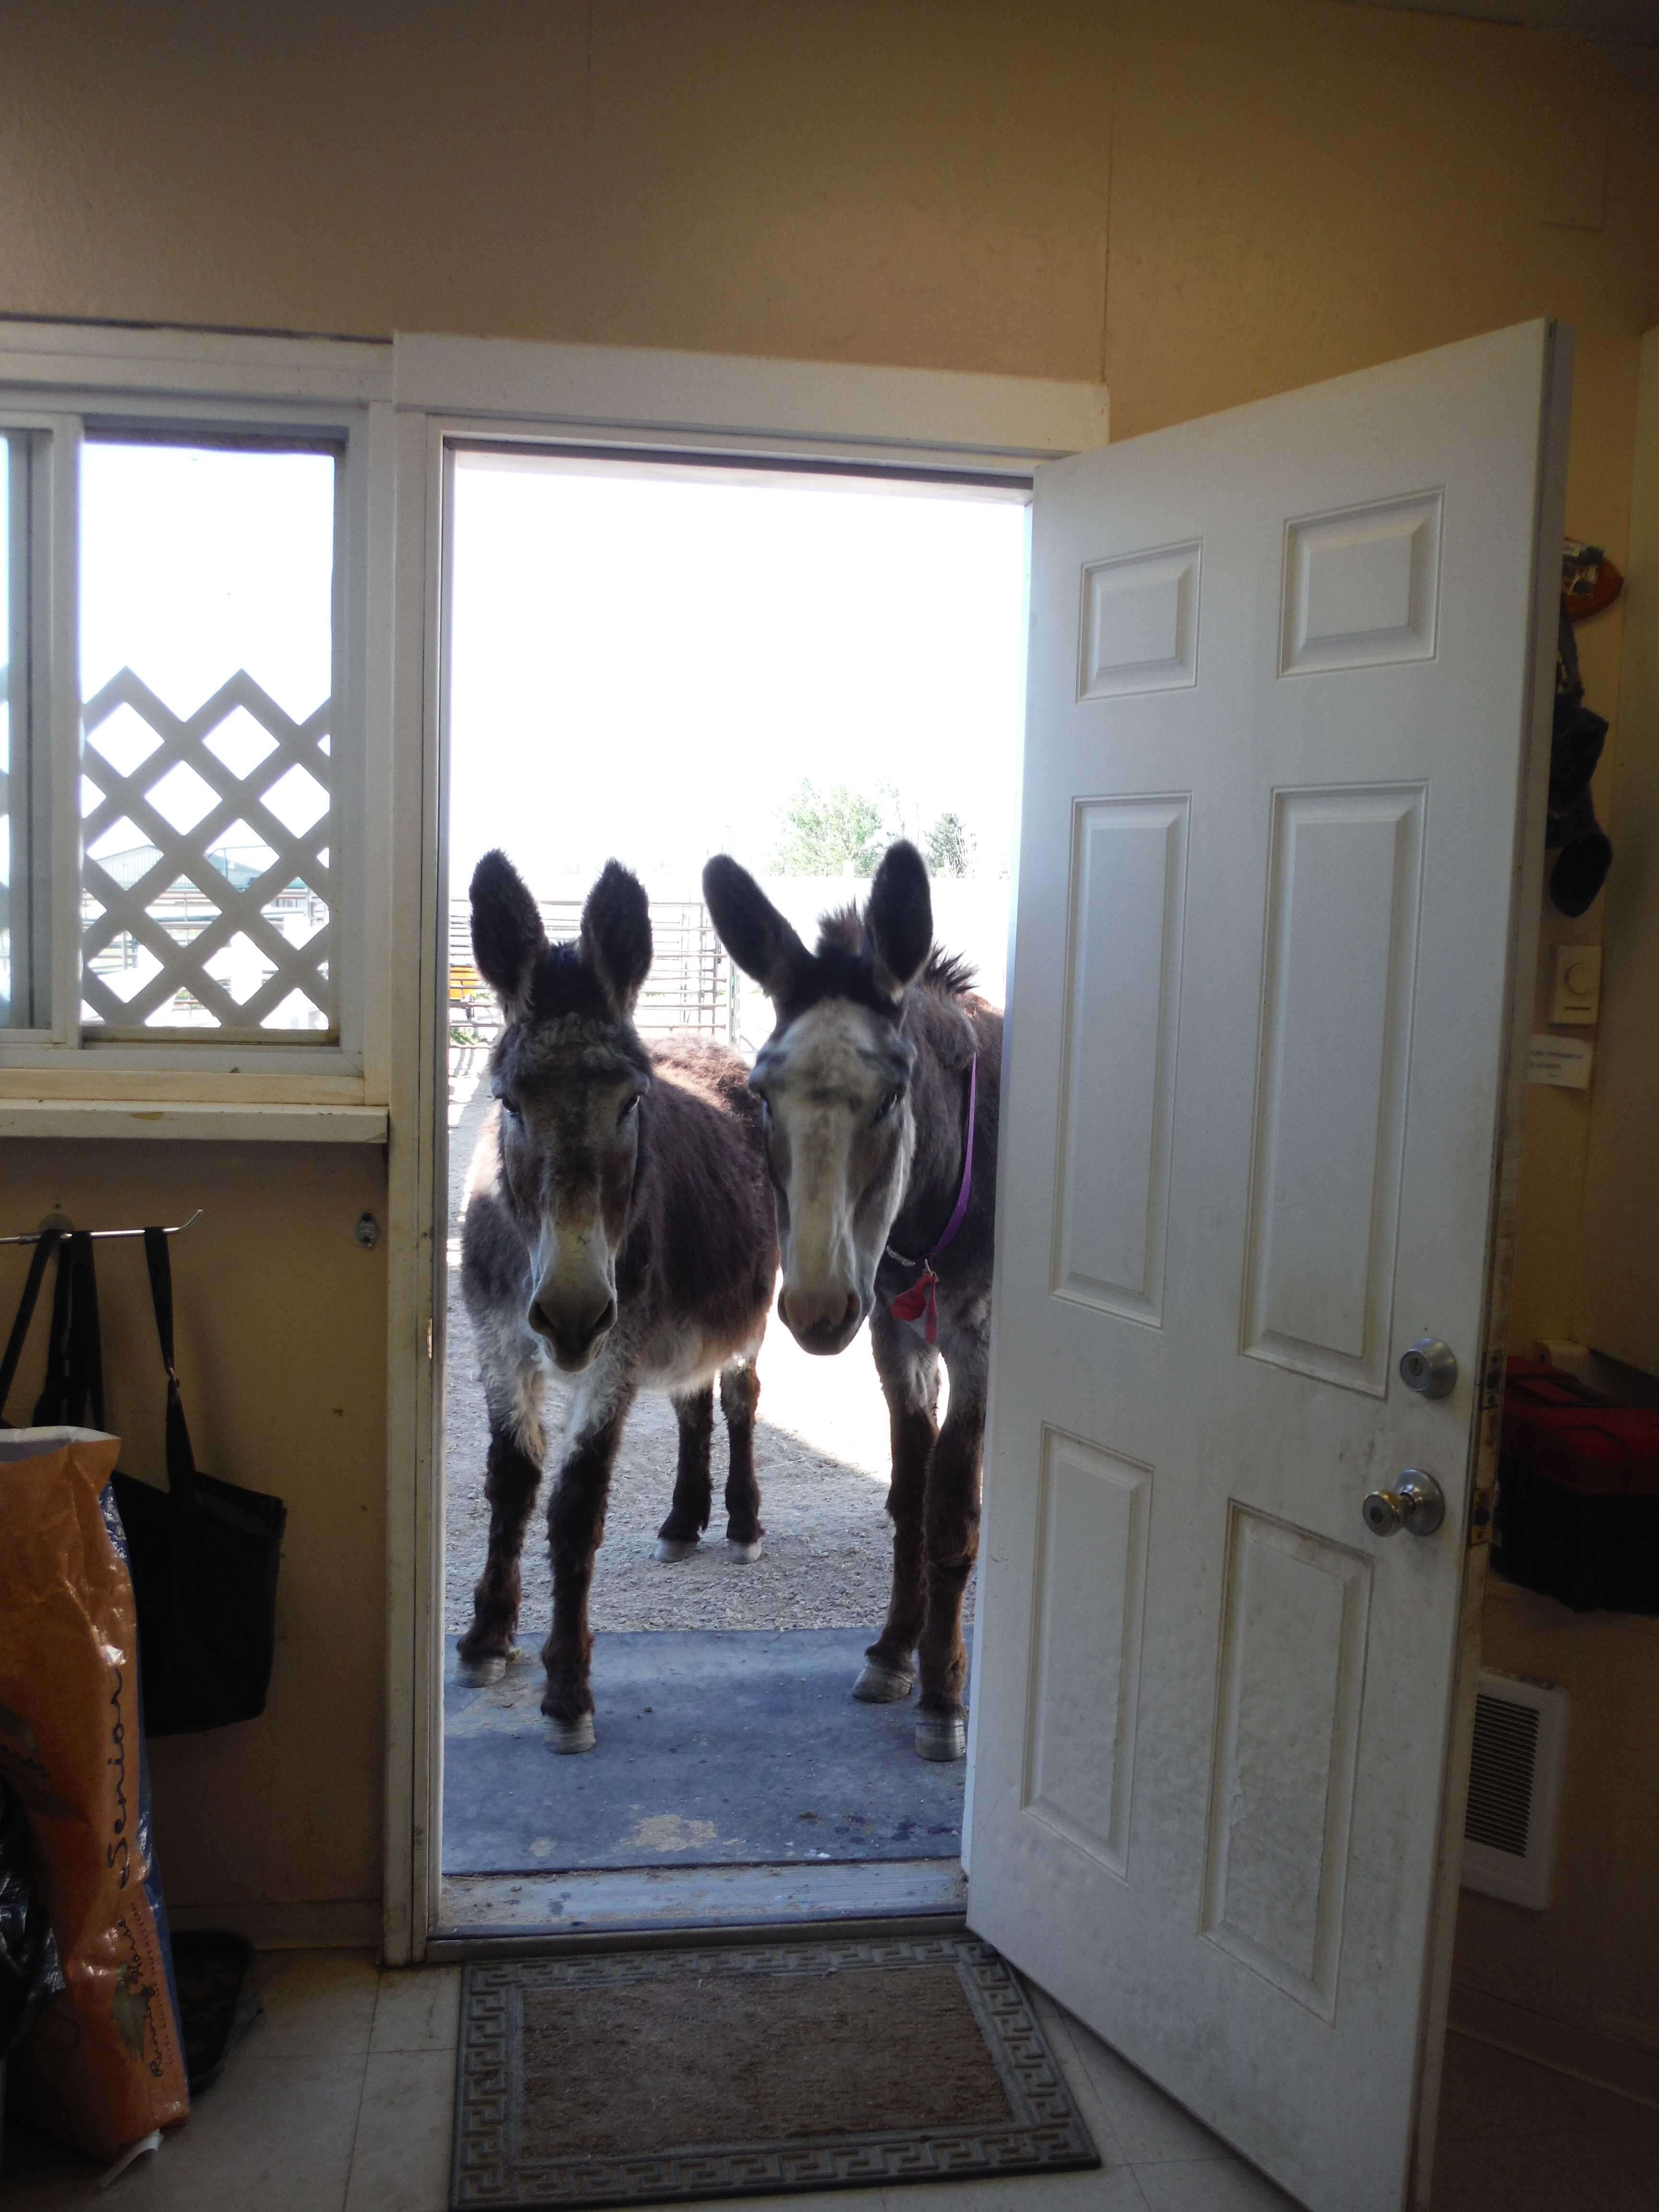 donkeys saved from slaughter become best friends 